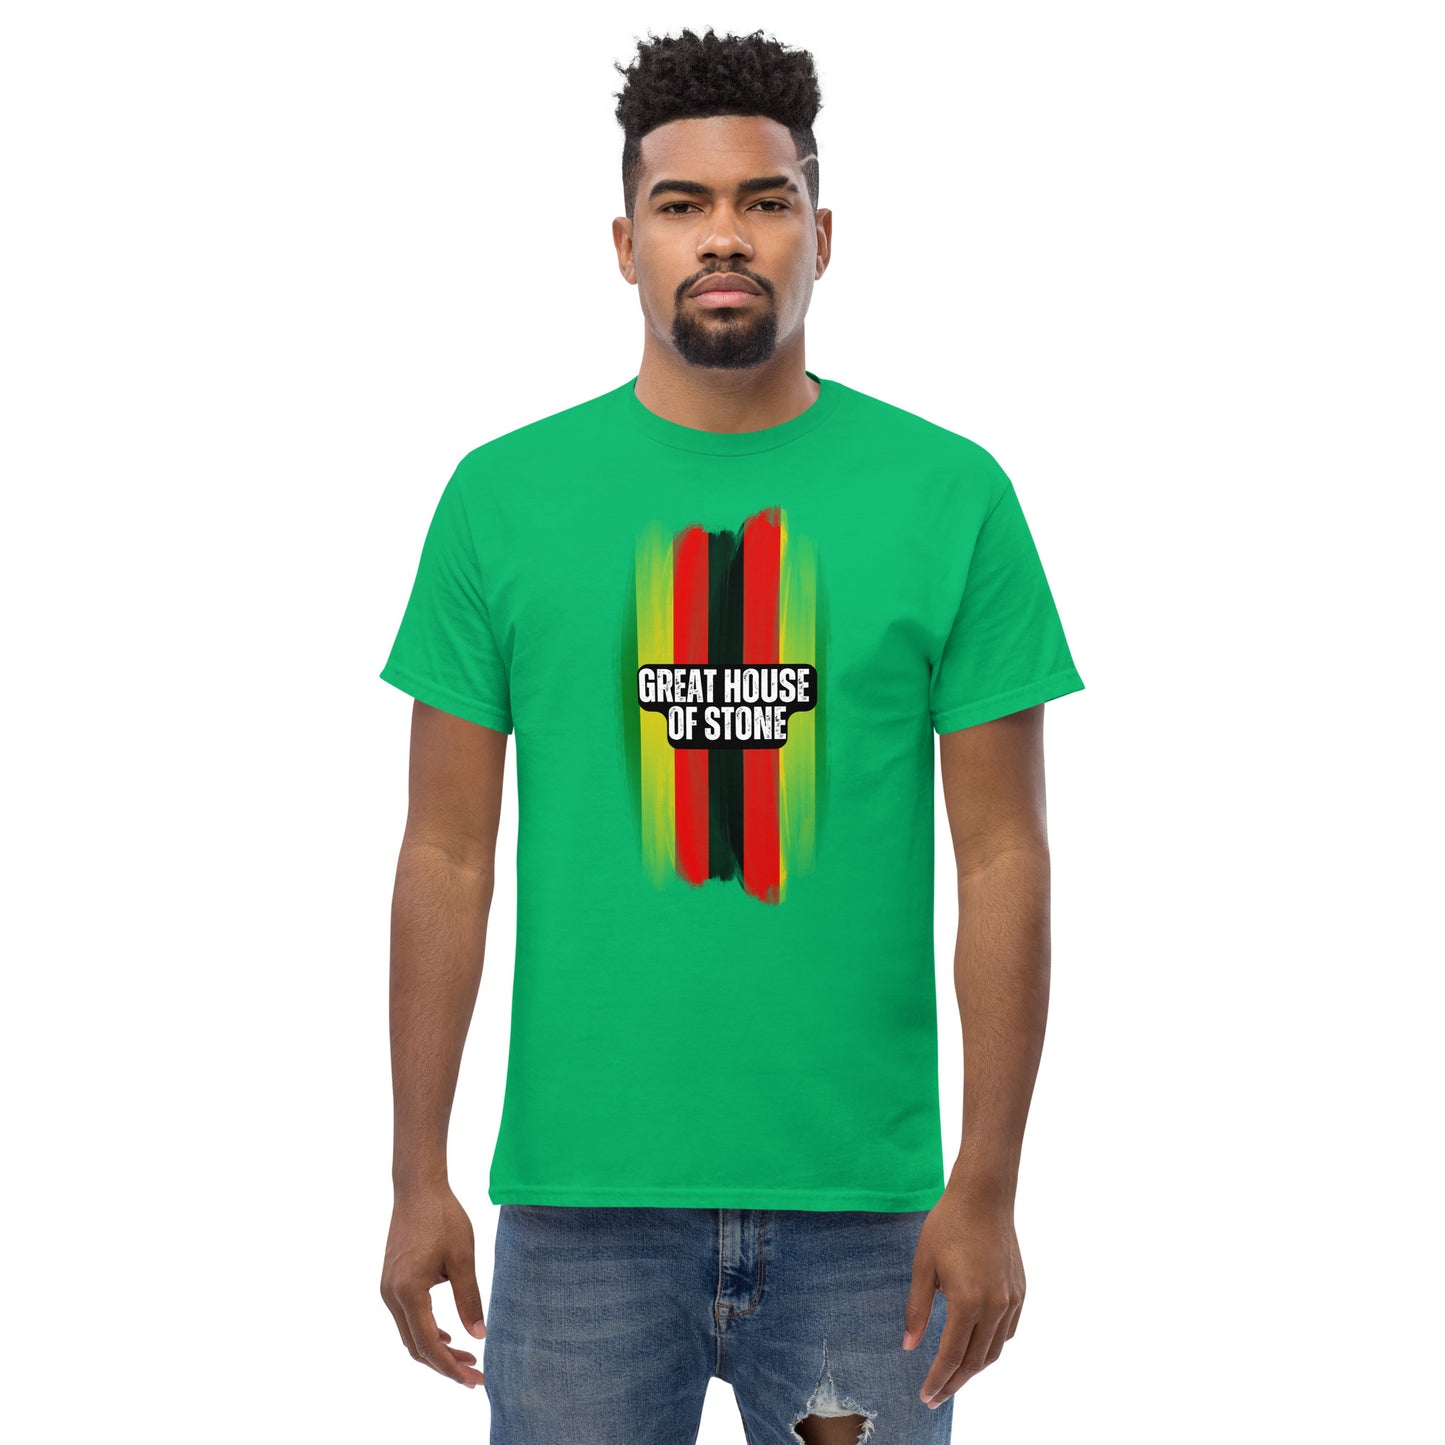 Men's classic Great House of Stone T shirt